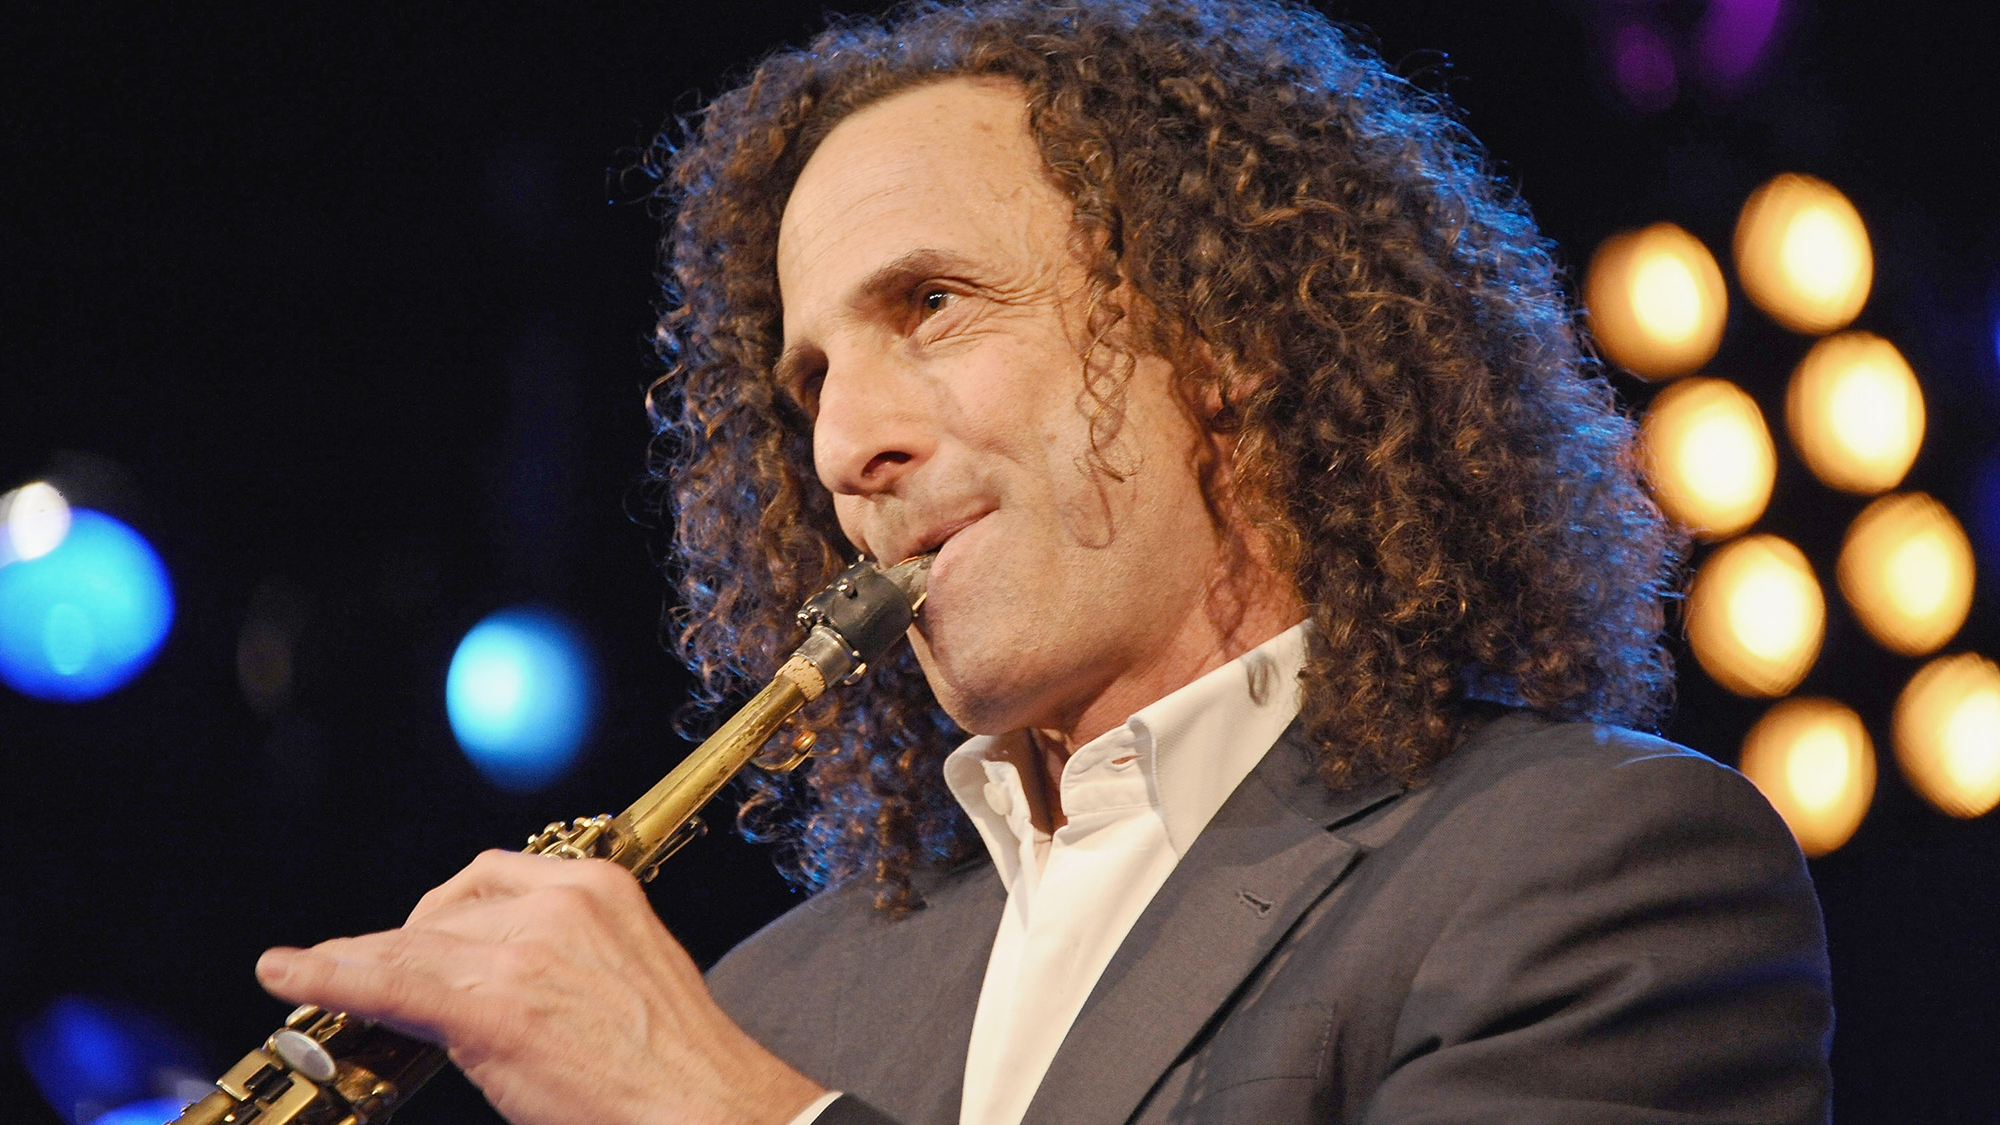 Kenny G - musicians who golf